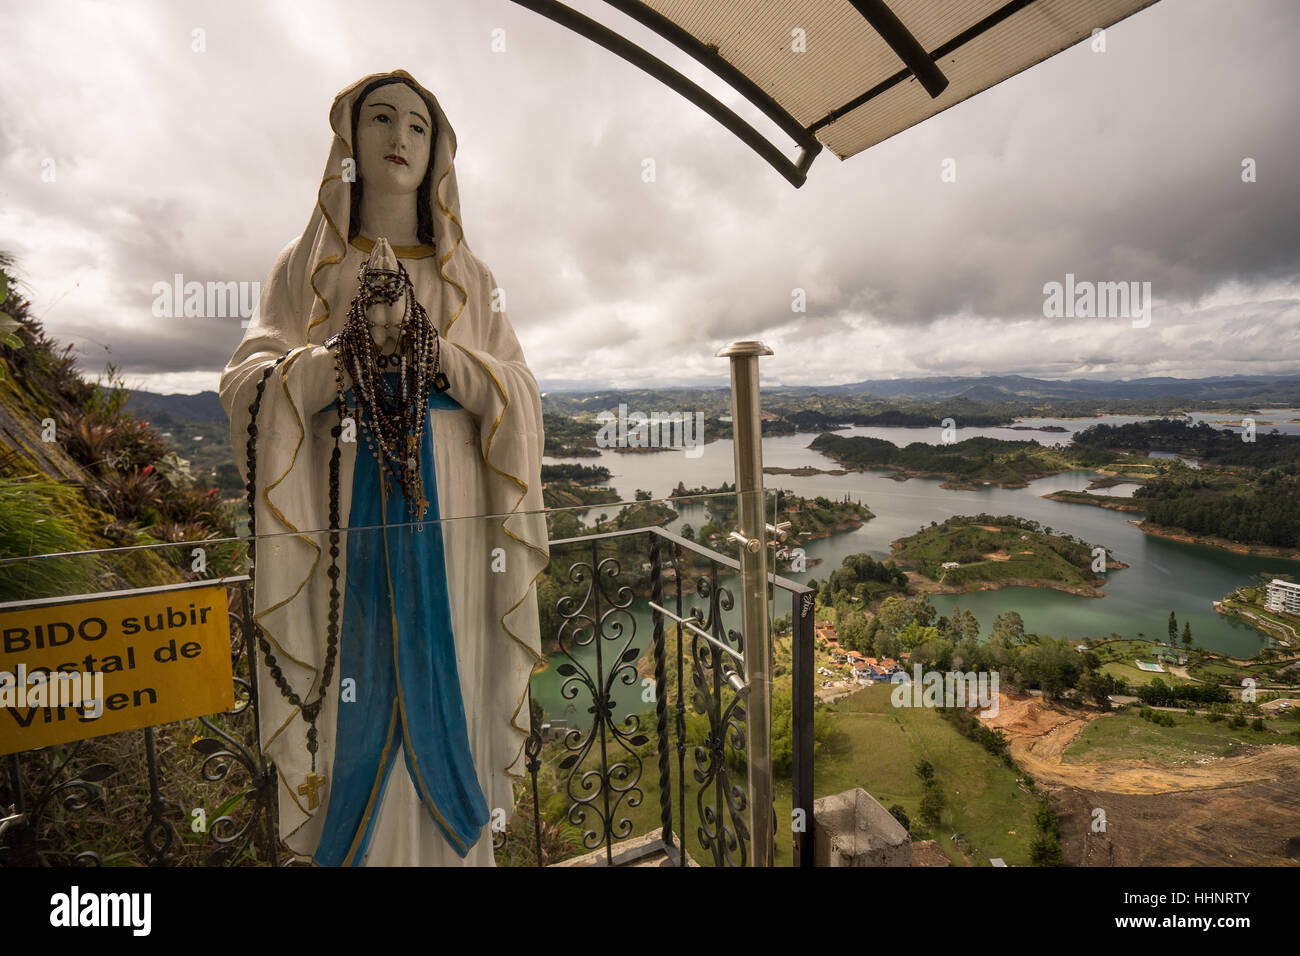 Virgin statue altar at Penon de Guatape Colombia aerial view of a residential area on the shore of the artificial lake Stock Photo